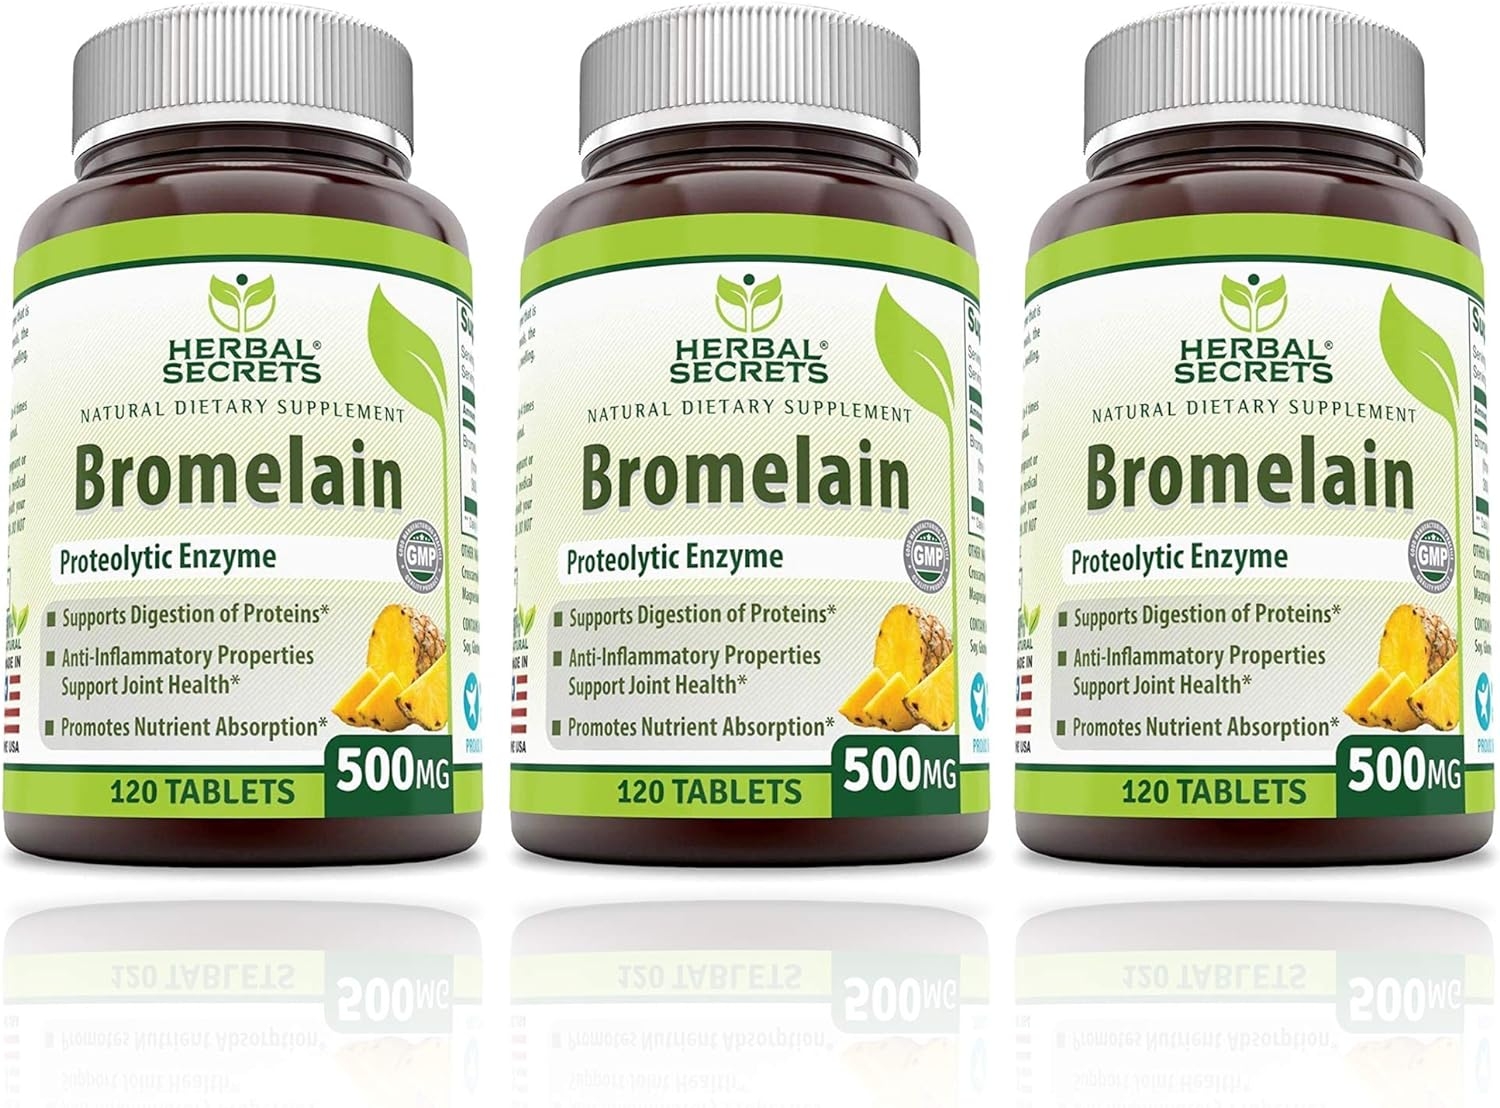 Herbal Secrets Bromelain 500 Mg 360 Tablets (Non-GMO)- Proteolytic Enzyme* Anti-Inflammatory Properties* Support Joint Health* Promotes Nutrient Absorption*